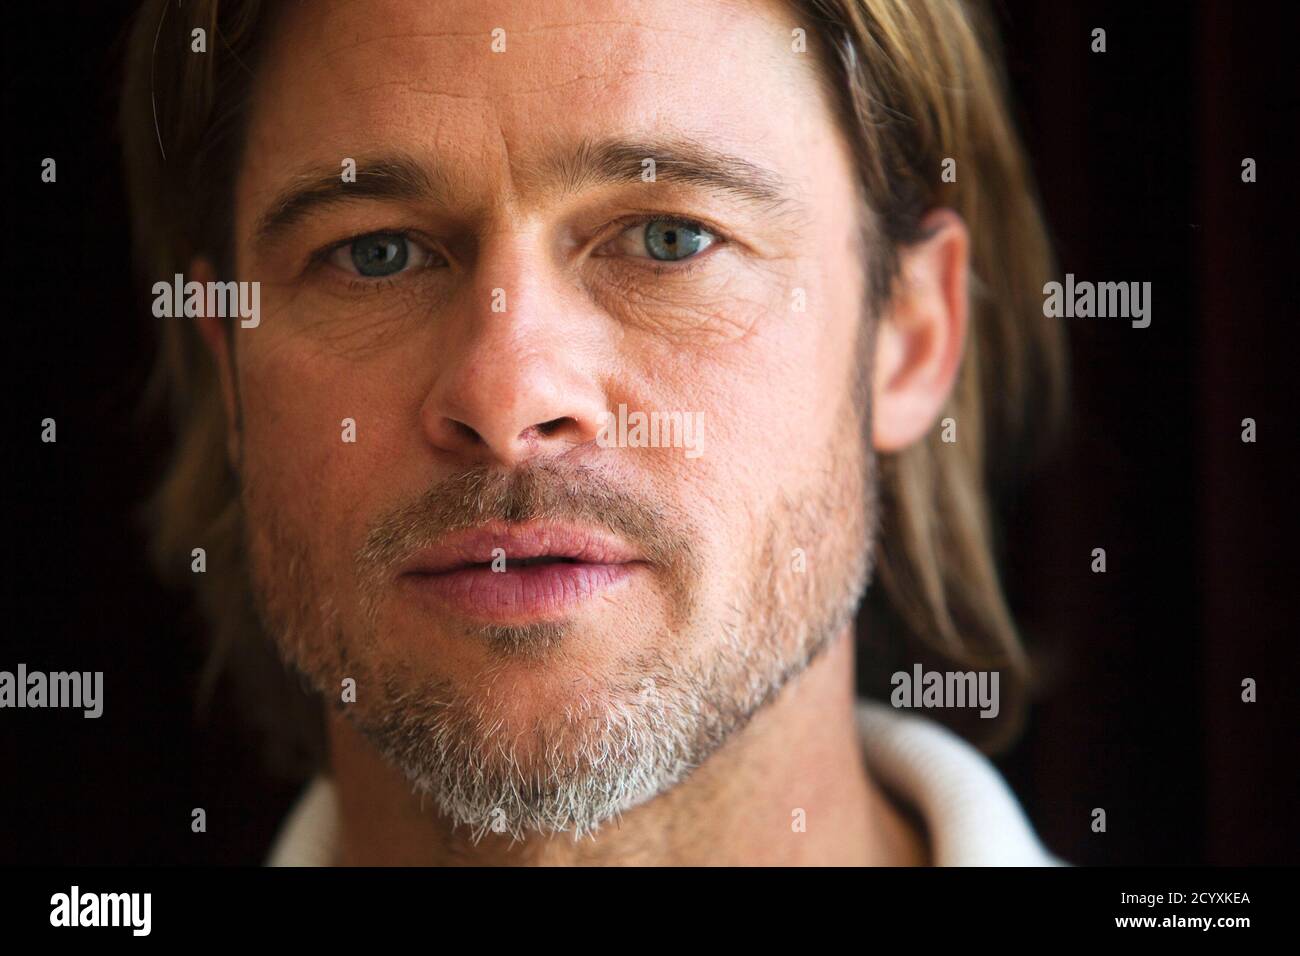 Actor Brad Pitt of the film 'Moneyball' poses during the 36th Toronto International Film Festival (TIFF) September 9, 2011. The TIFF runs from September 8-18.      REUTERS/Mark Blinch (CANADA - Tags: ENTERTAINMENT) Stock Photo